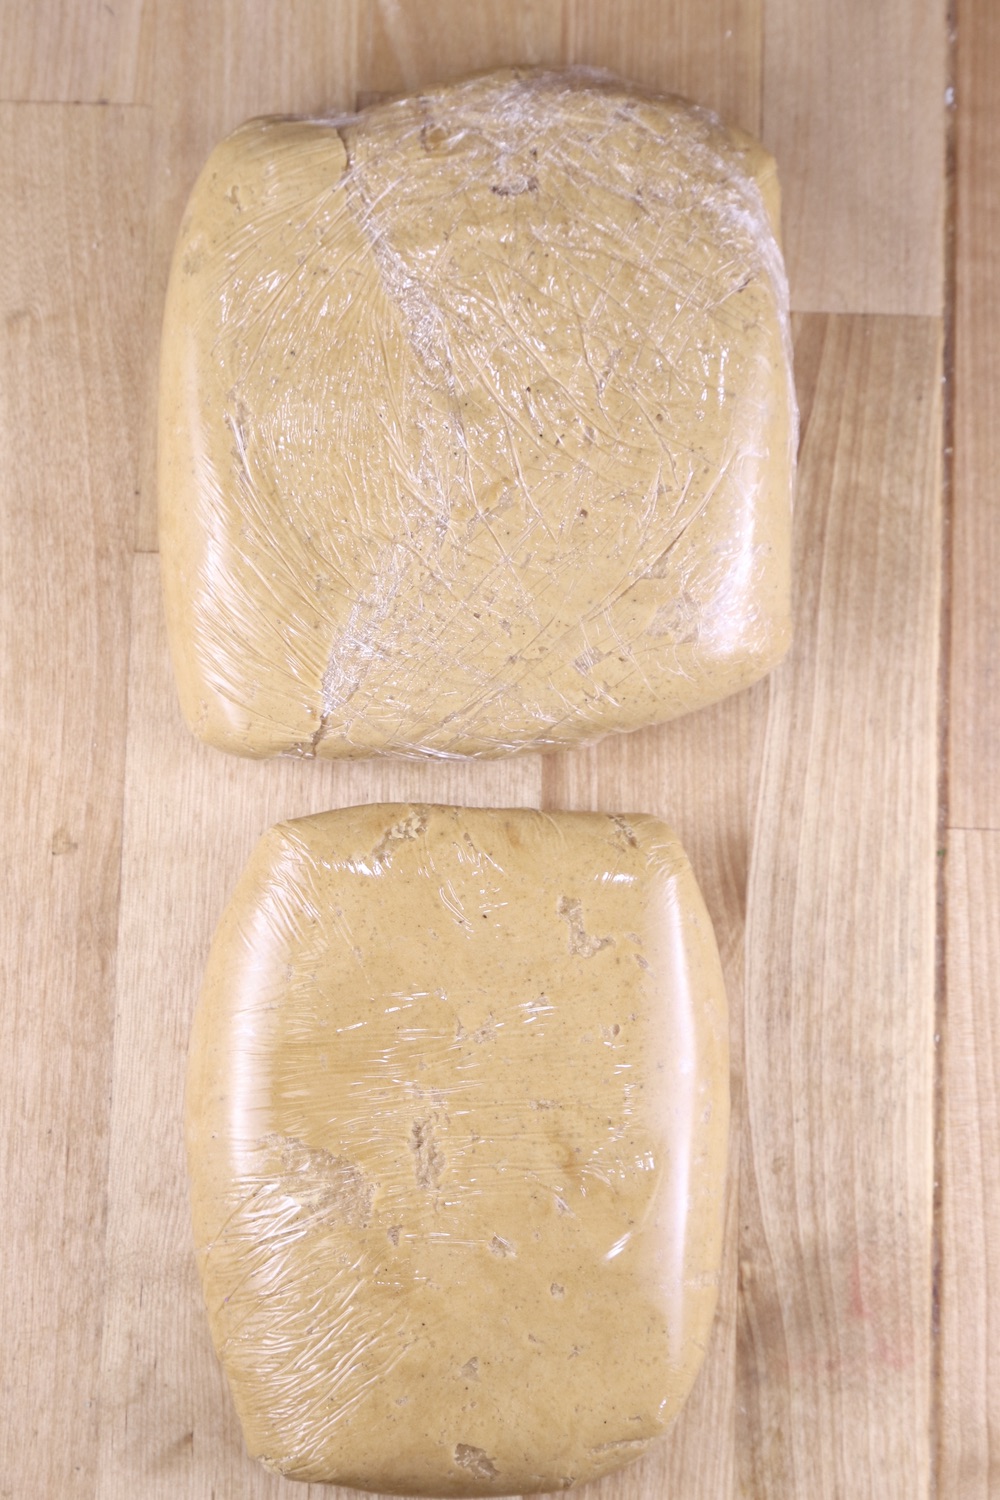 Gingerbread Cookie Dough in 2 squares wrapped in plastic wrap.